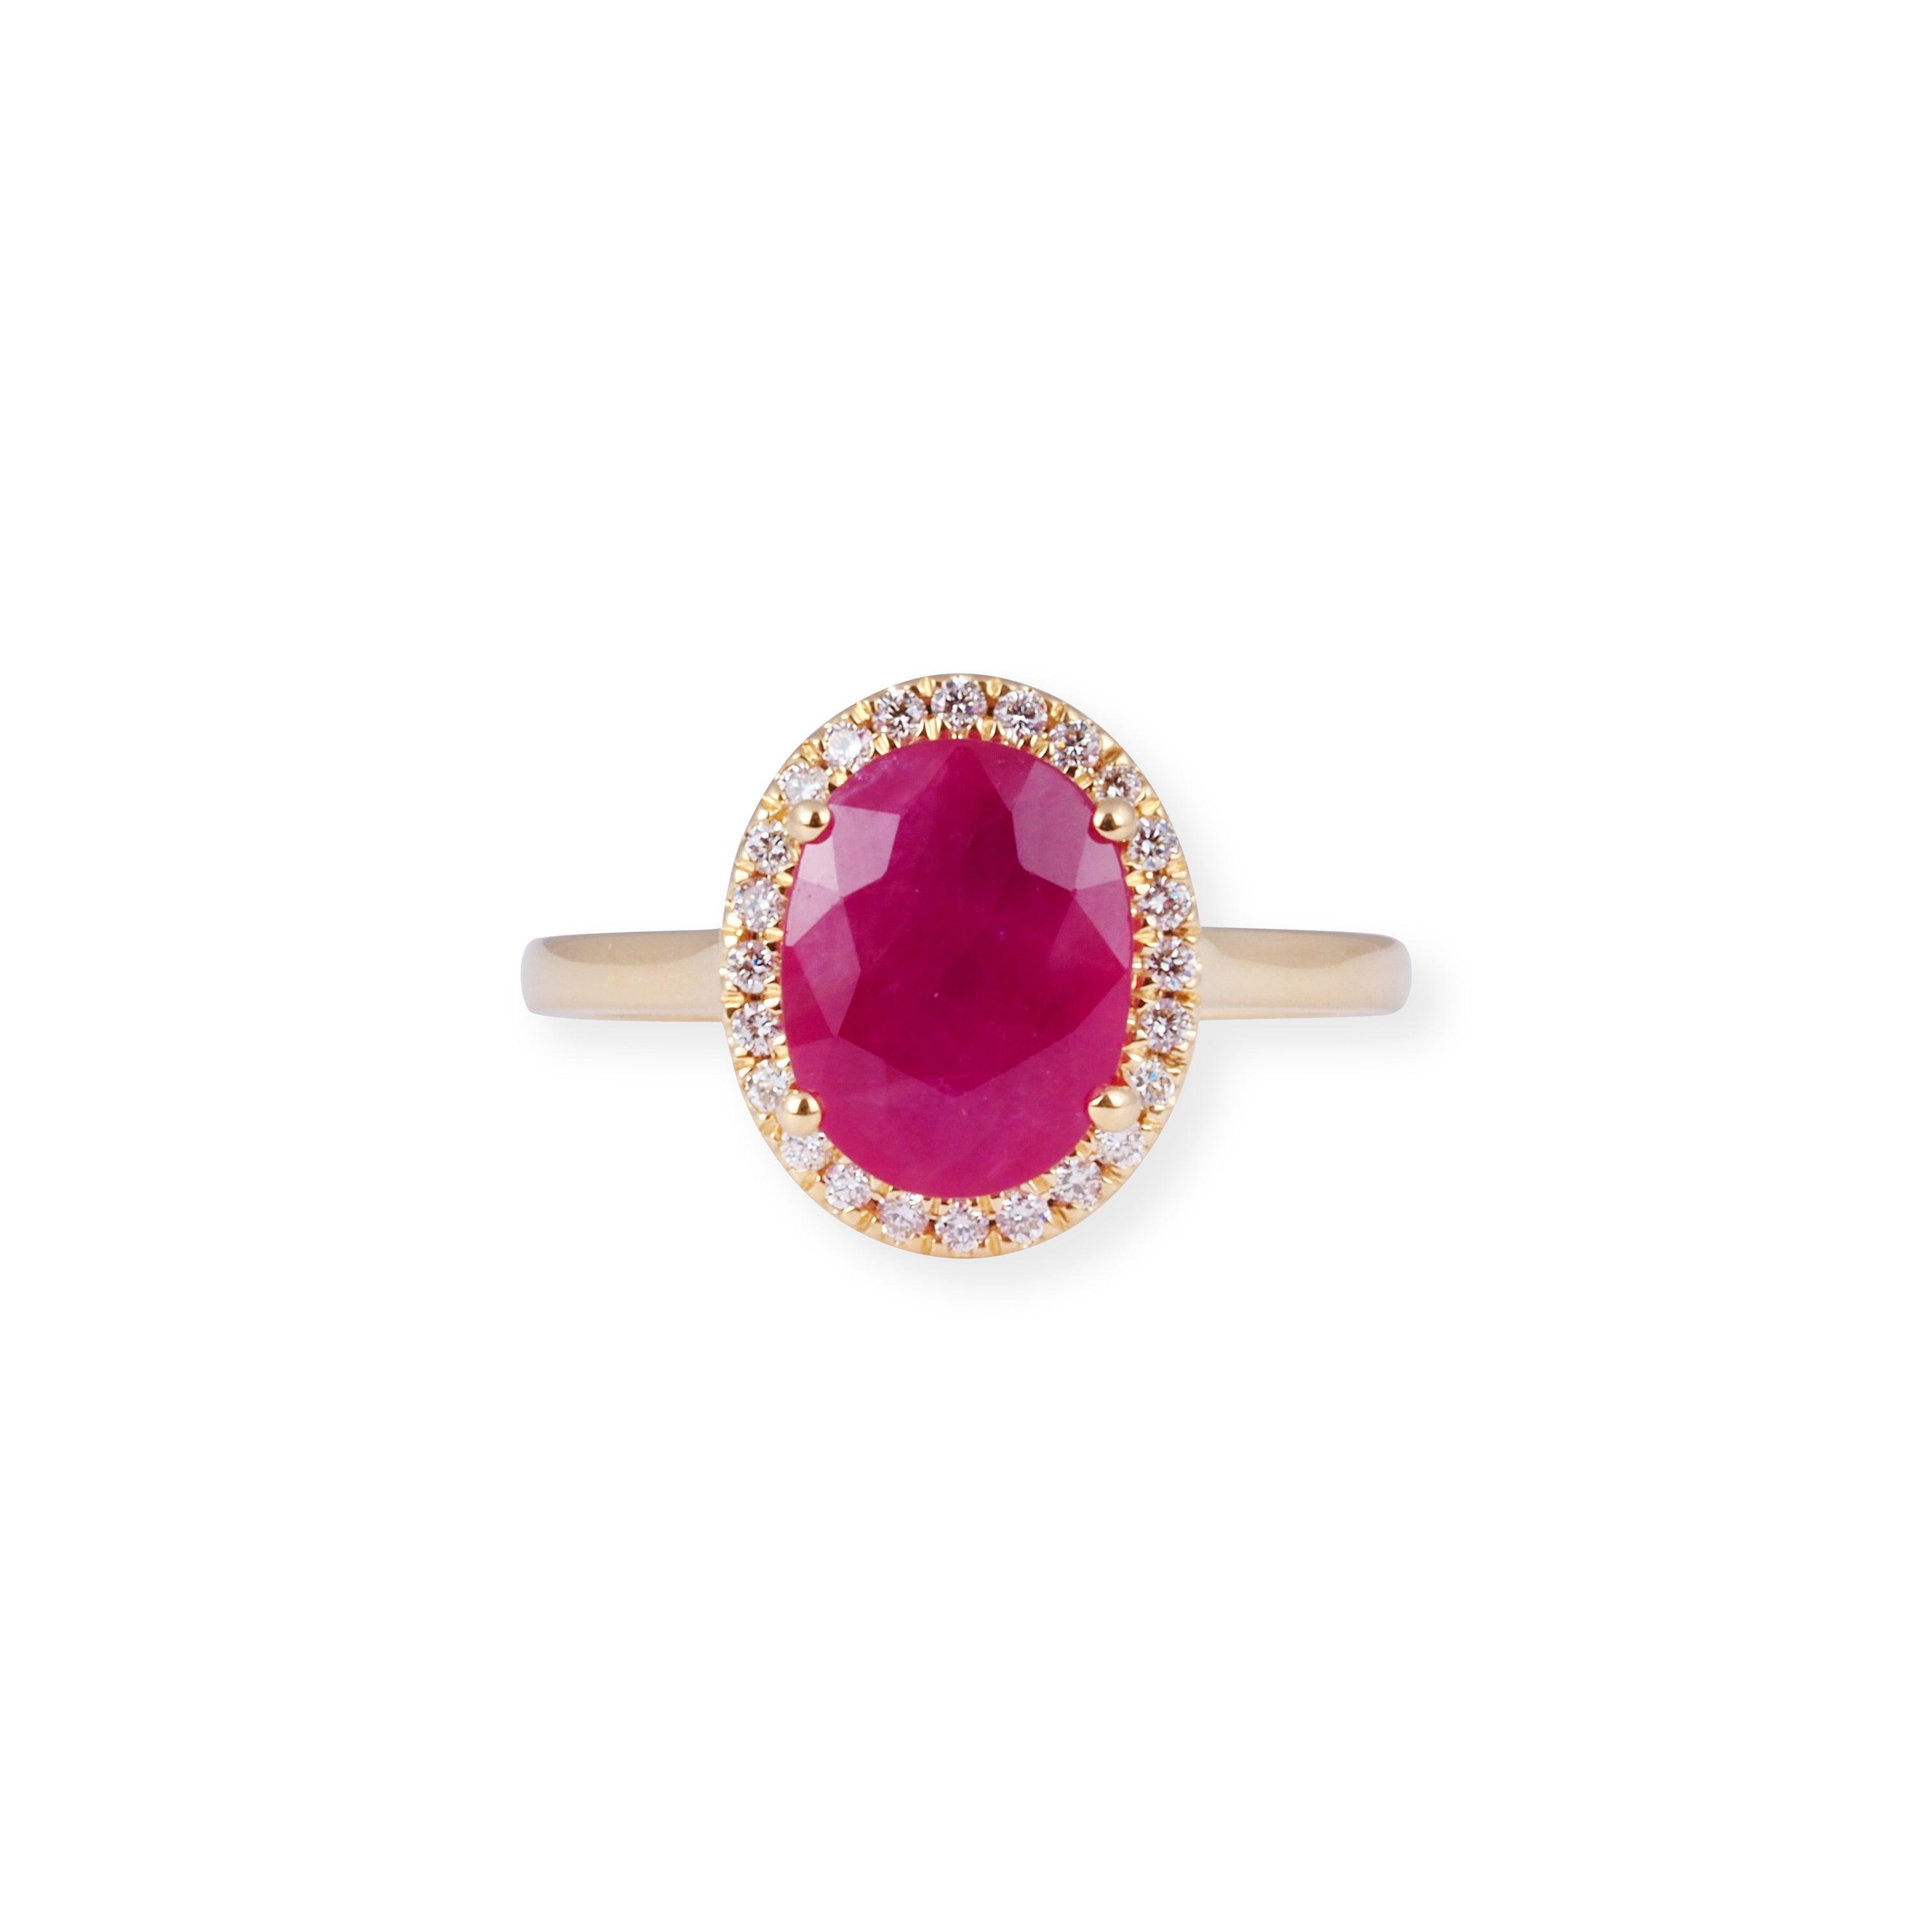 18ct Yellow Gold Dress Ring with Diamond and Ruby LR-7063 - Minar Jewellers